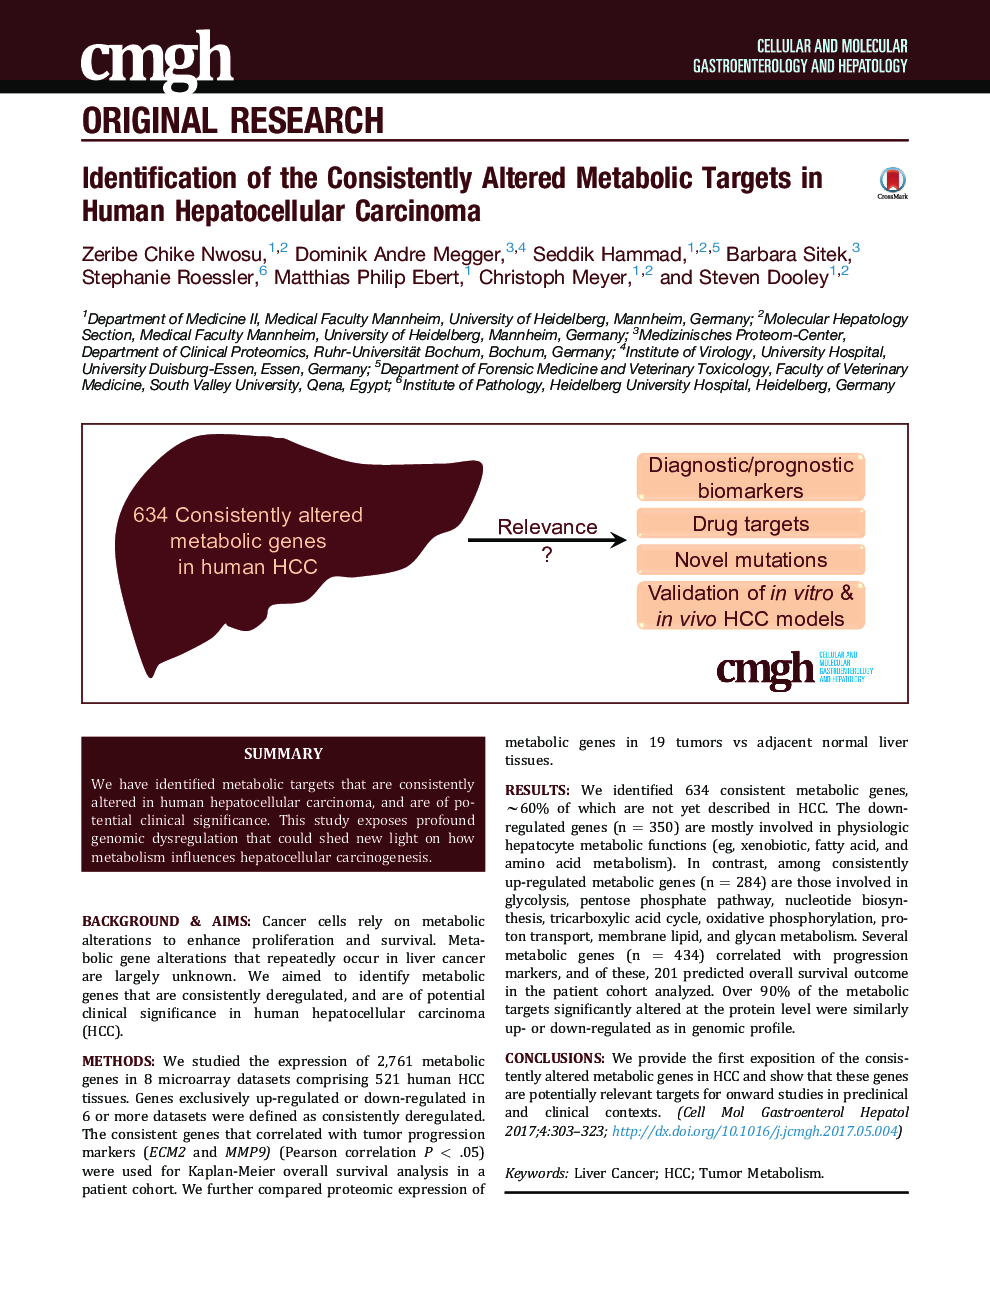 Identification of the Consistently Altered Metabolic Targets in Human Hepatocellular Carcinoma